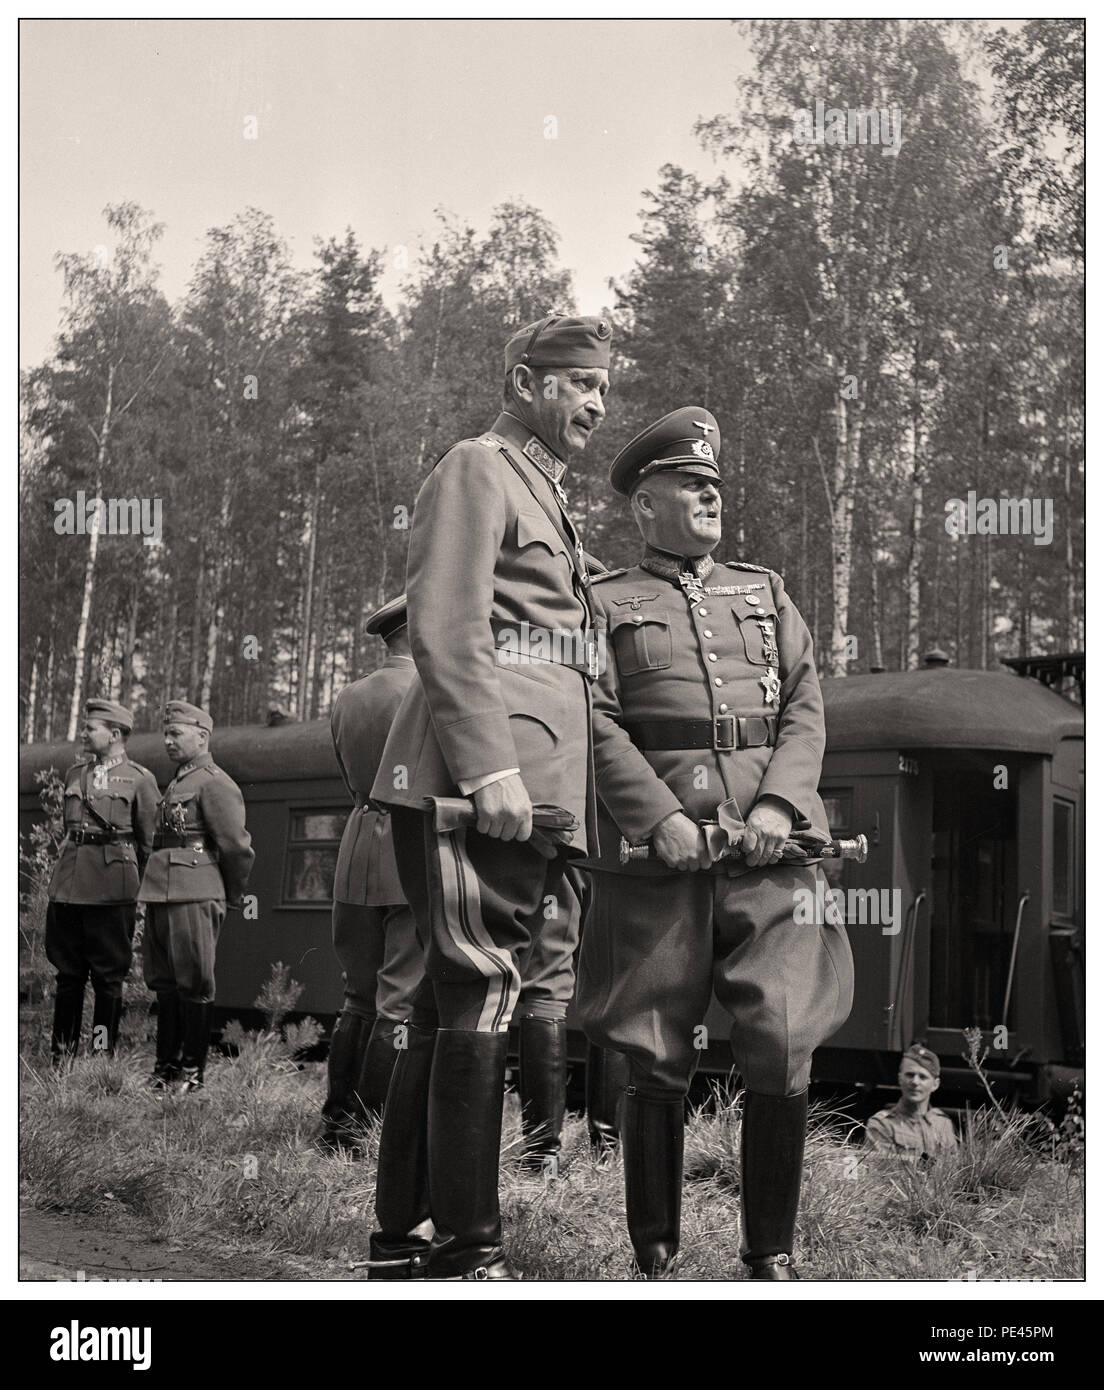 MANNERHEIM / KEITEL waiting for Adolf Hitler.. Adolf Hitler decided to visit Finland on 4 June 1942, ostensibly to congratulate Mannerheim on his 75th birthday. But Mannerheim did not want to meet him in his headquarters in Mikkeli or in Helsinki, as it would have seemed like an official state visit. The meeting took place near Imatra, in south-eastern Finland, and was arranged in secrecy. From Immola Airfield, Hitler, accompanied by President Ryti, was driven to the place where Mannerheim was waiting at a railway siding. The meeting was inconclusive... Stock Photo